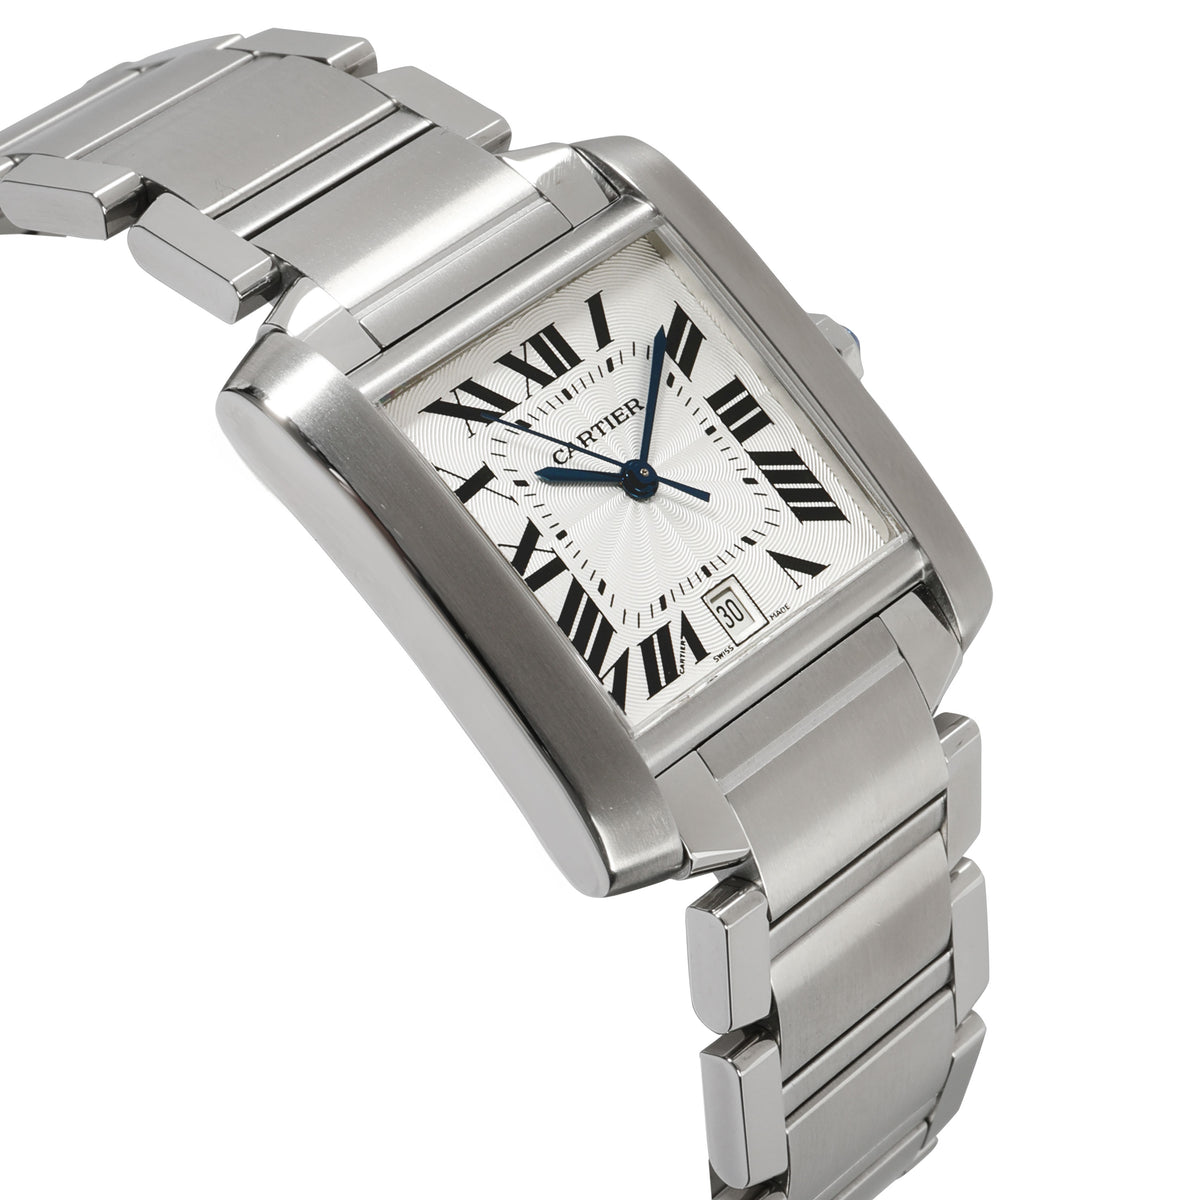 Cartier Tank Francaise W51002Q3 Men's Watch in  Stainless Steel